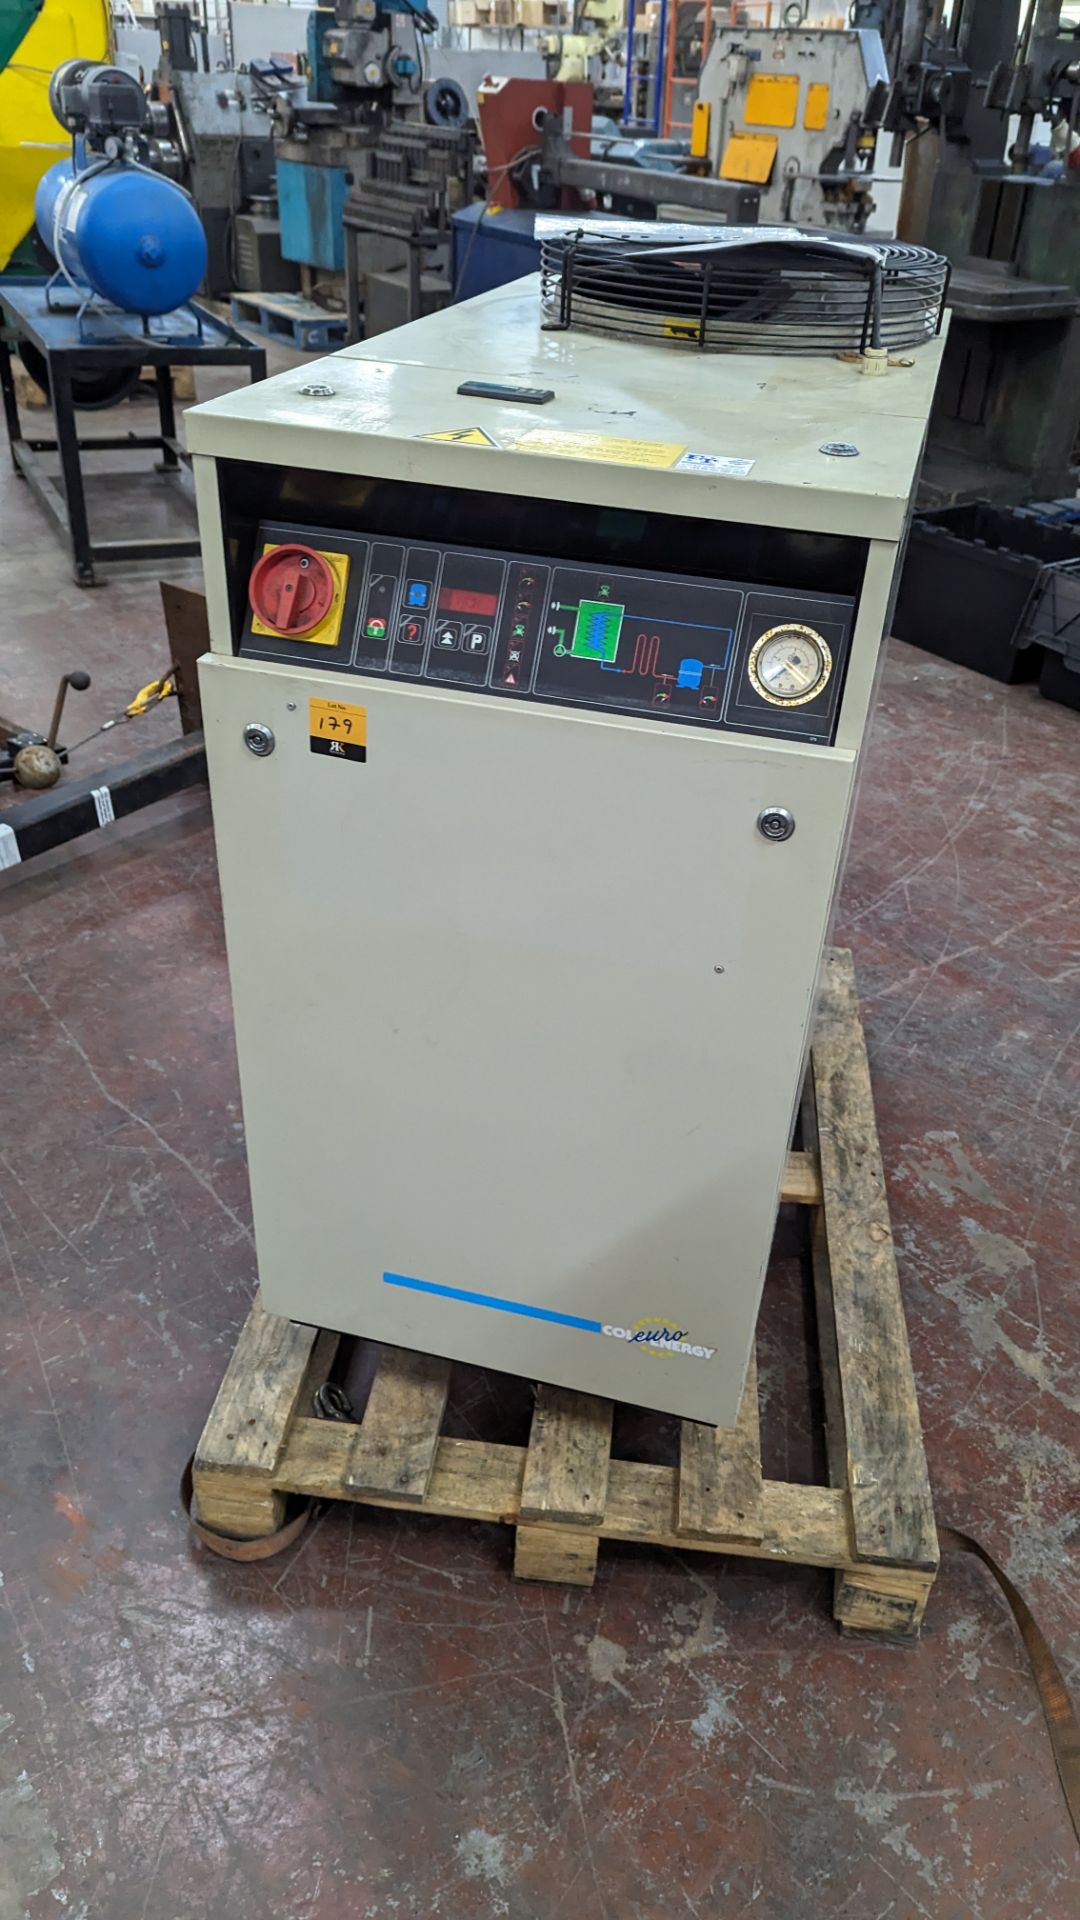 Cold Energy Euro chiller, type TAE020. Understood to have been reconditioned